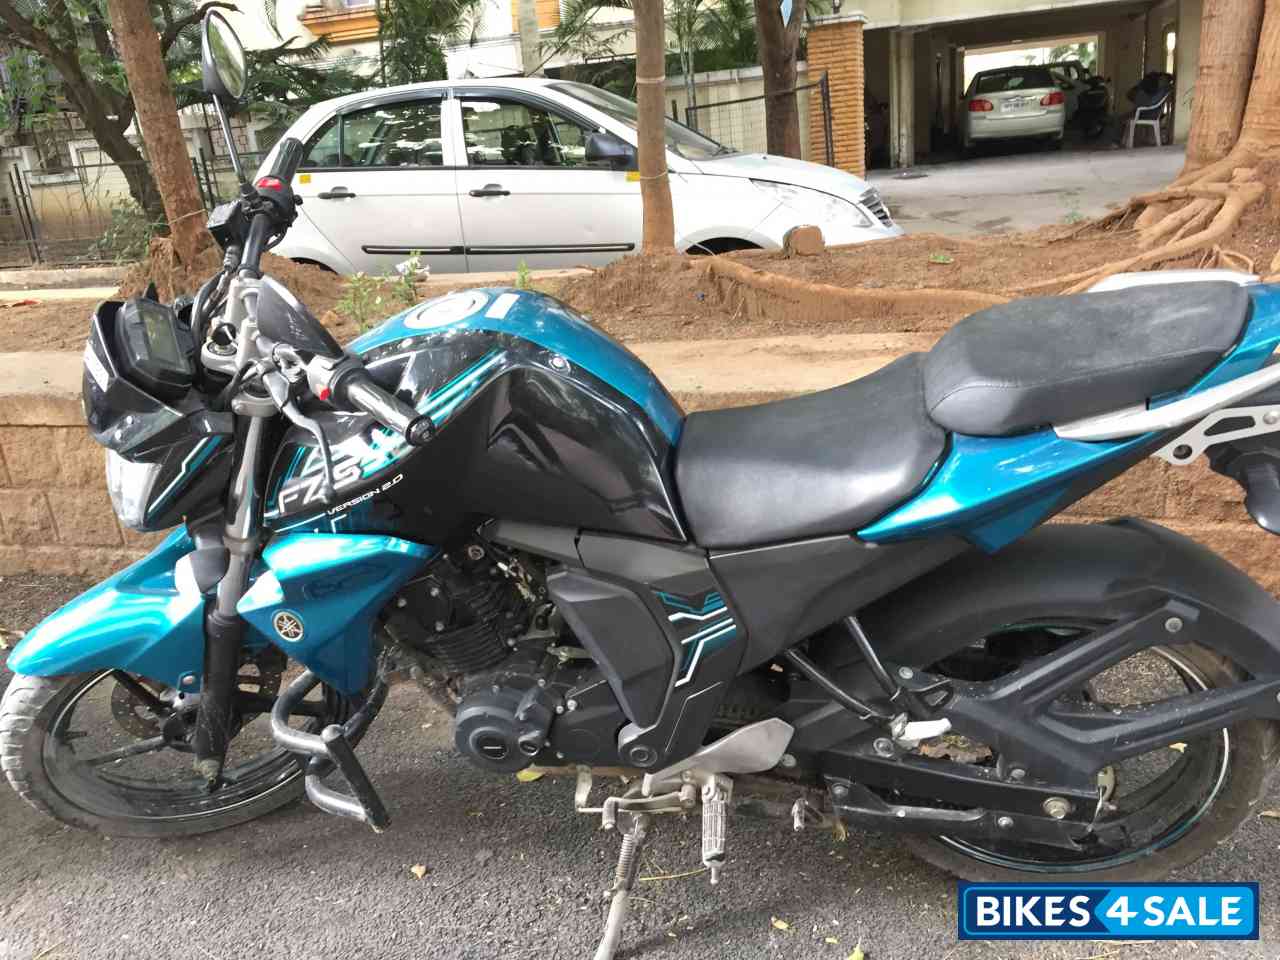 Used 2014 model Yamaha FZ-S FI V2 for sale in Hyderabad. ID 151795 ...